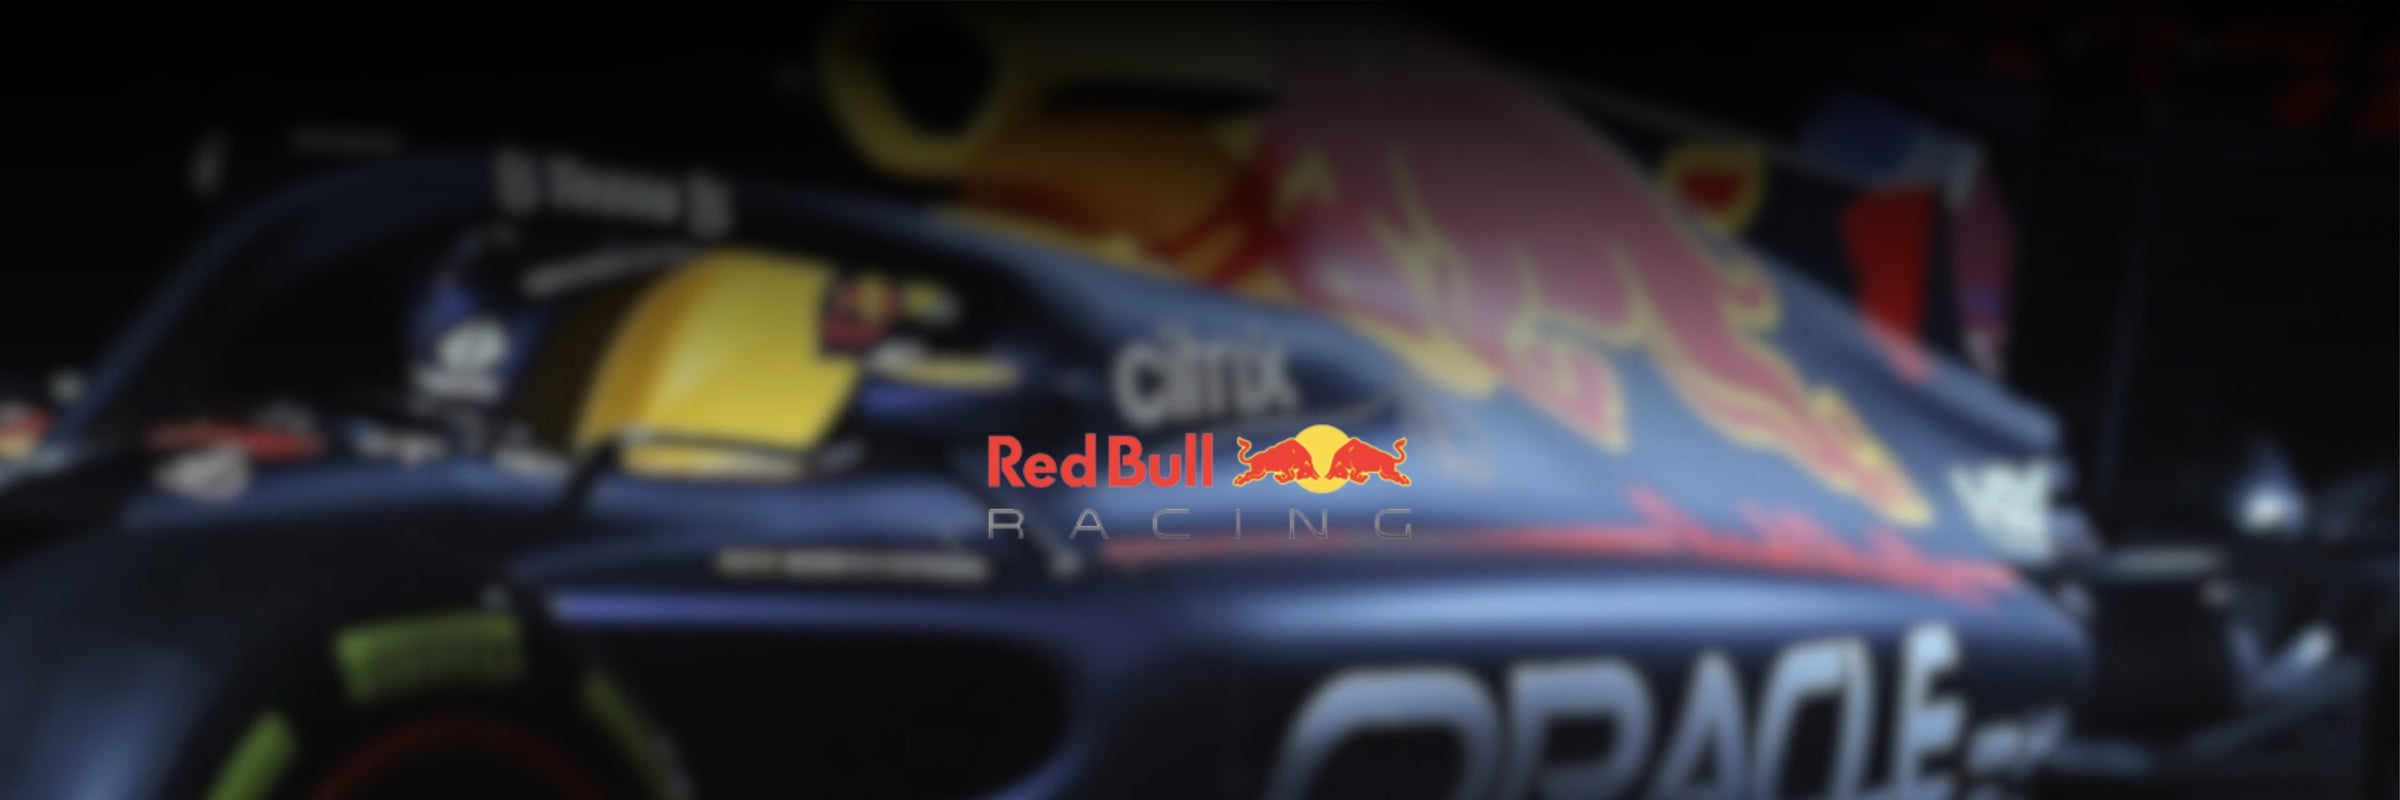 Red Bull Racing - F1 and Motorpsort Offficial Merchandise - Fueler store